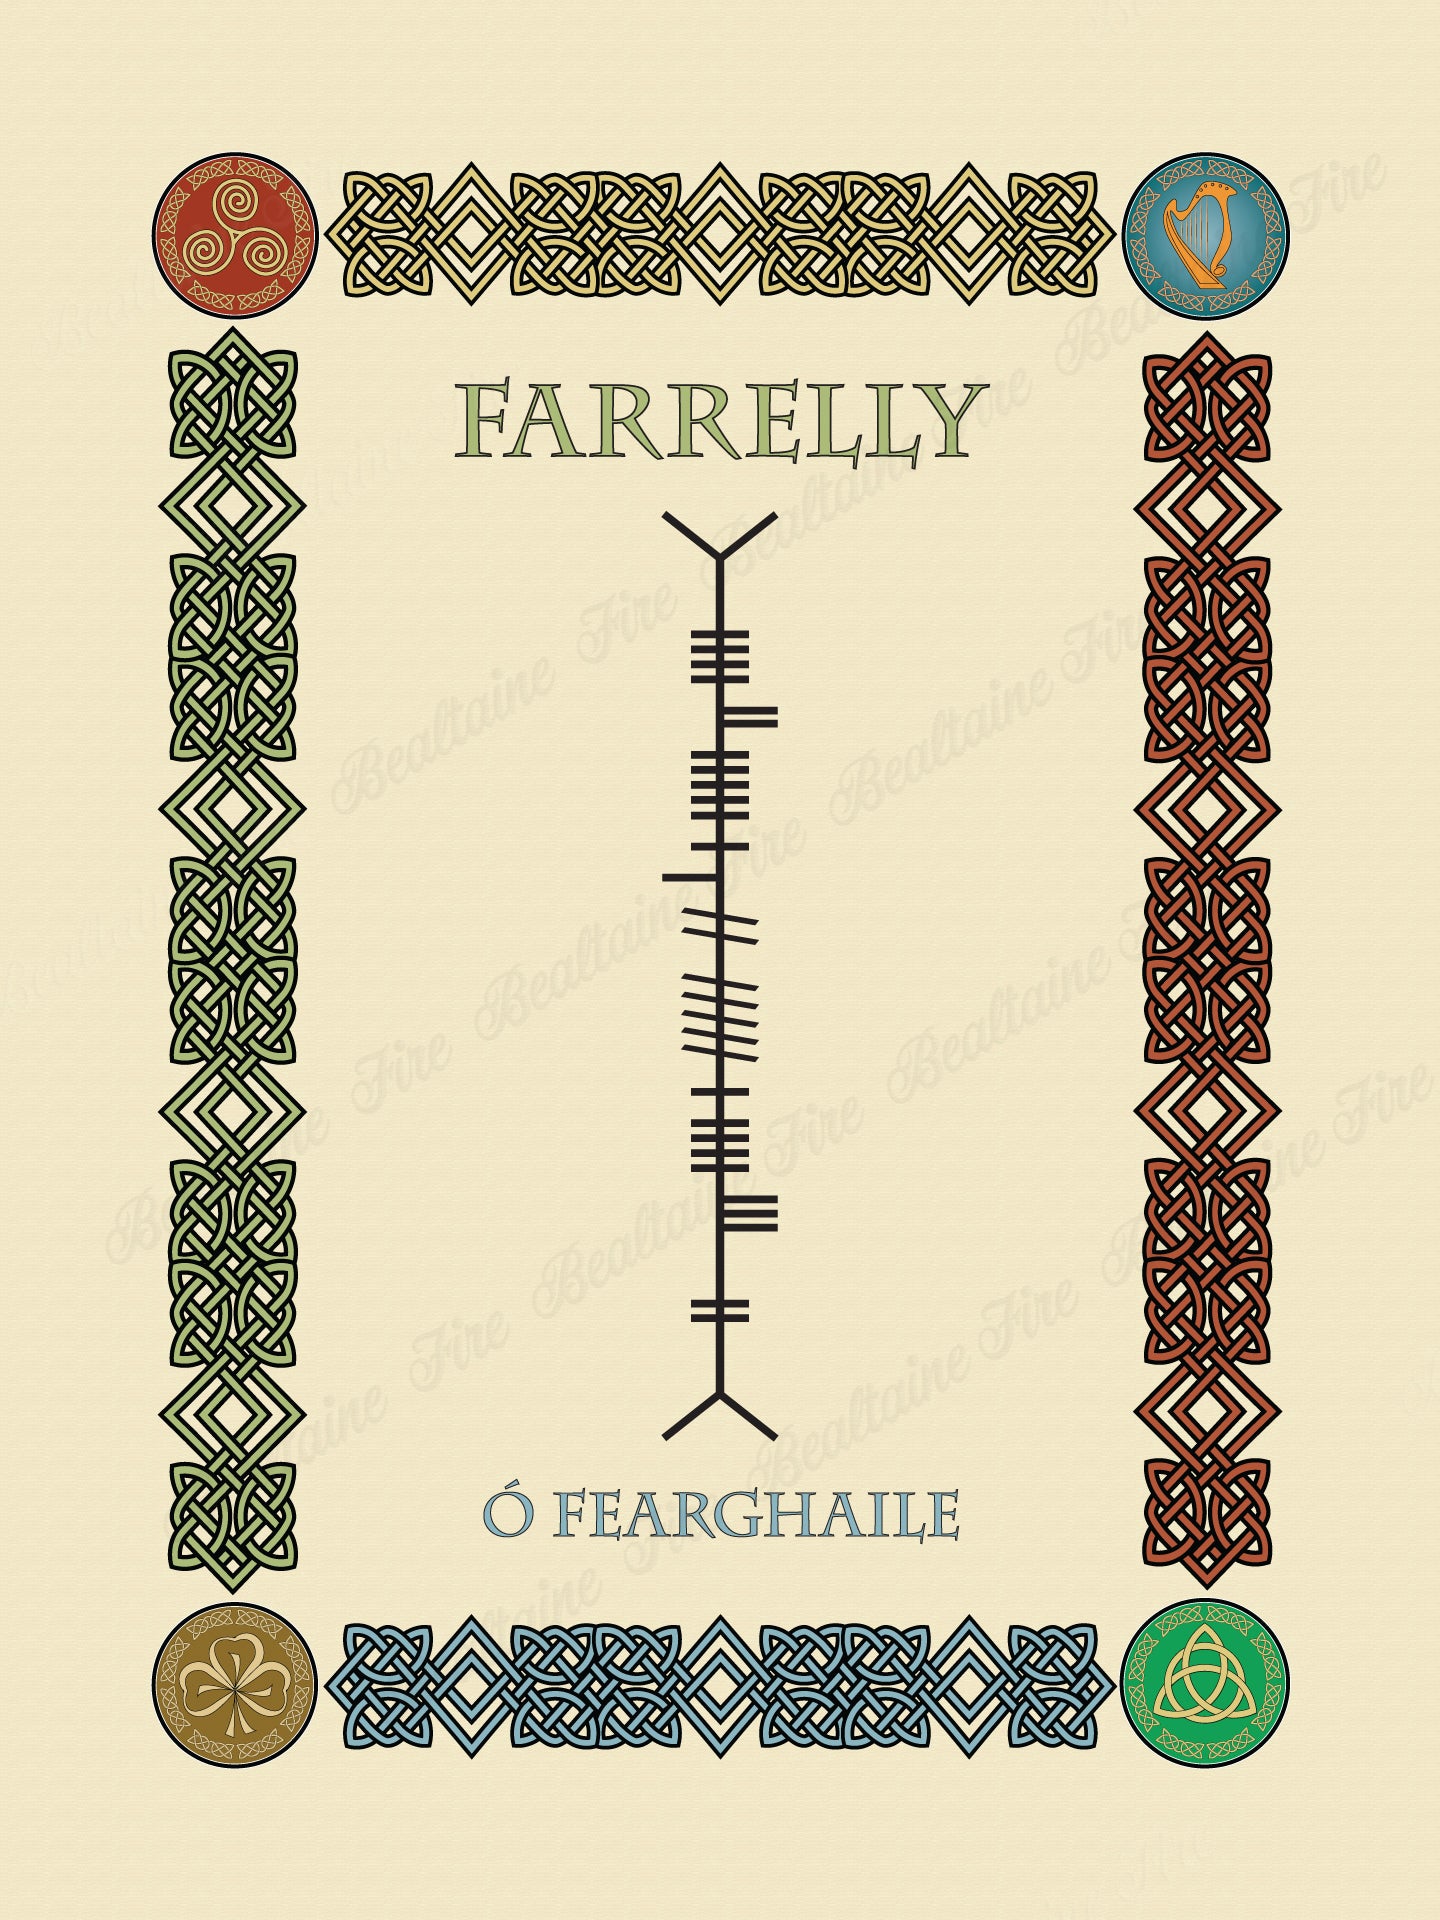 Farrelly in Old Irish and Ogham - PDF Download